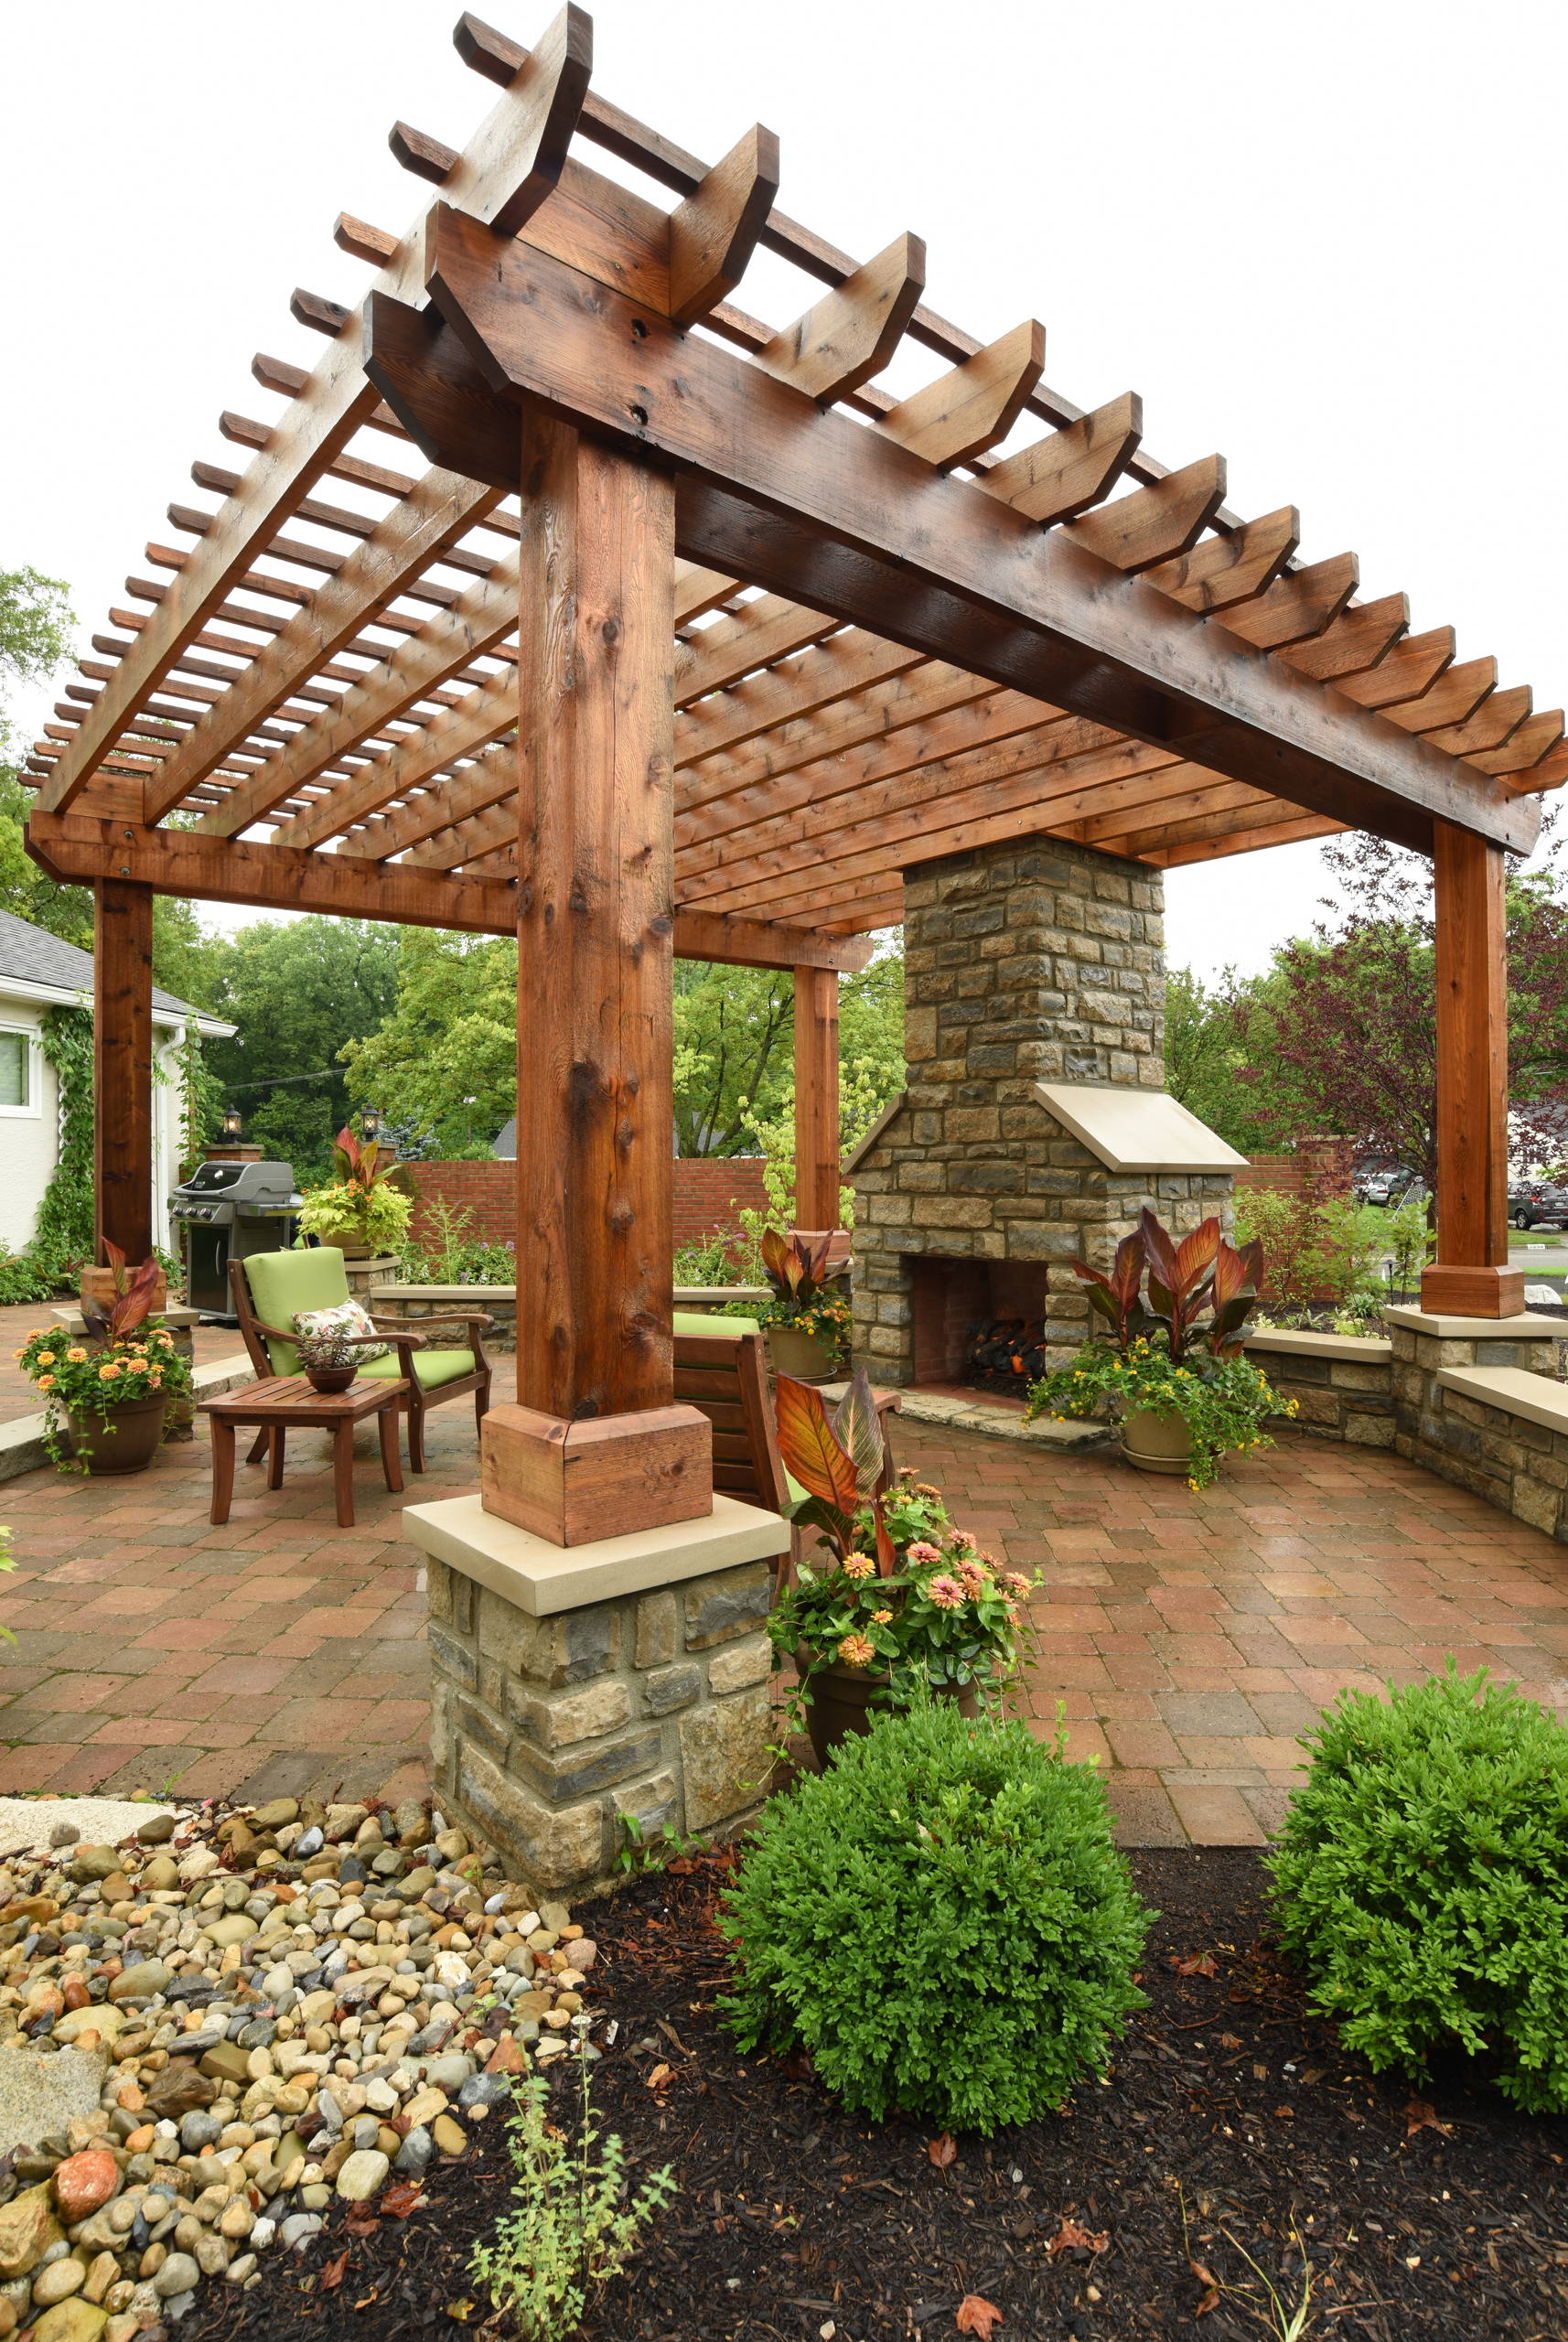 75 Transitional Patio Ideas You'll Love - June, 2022 | Houzz